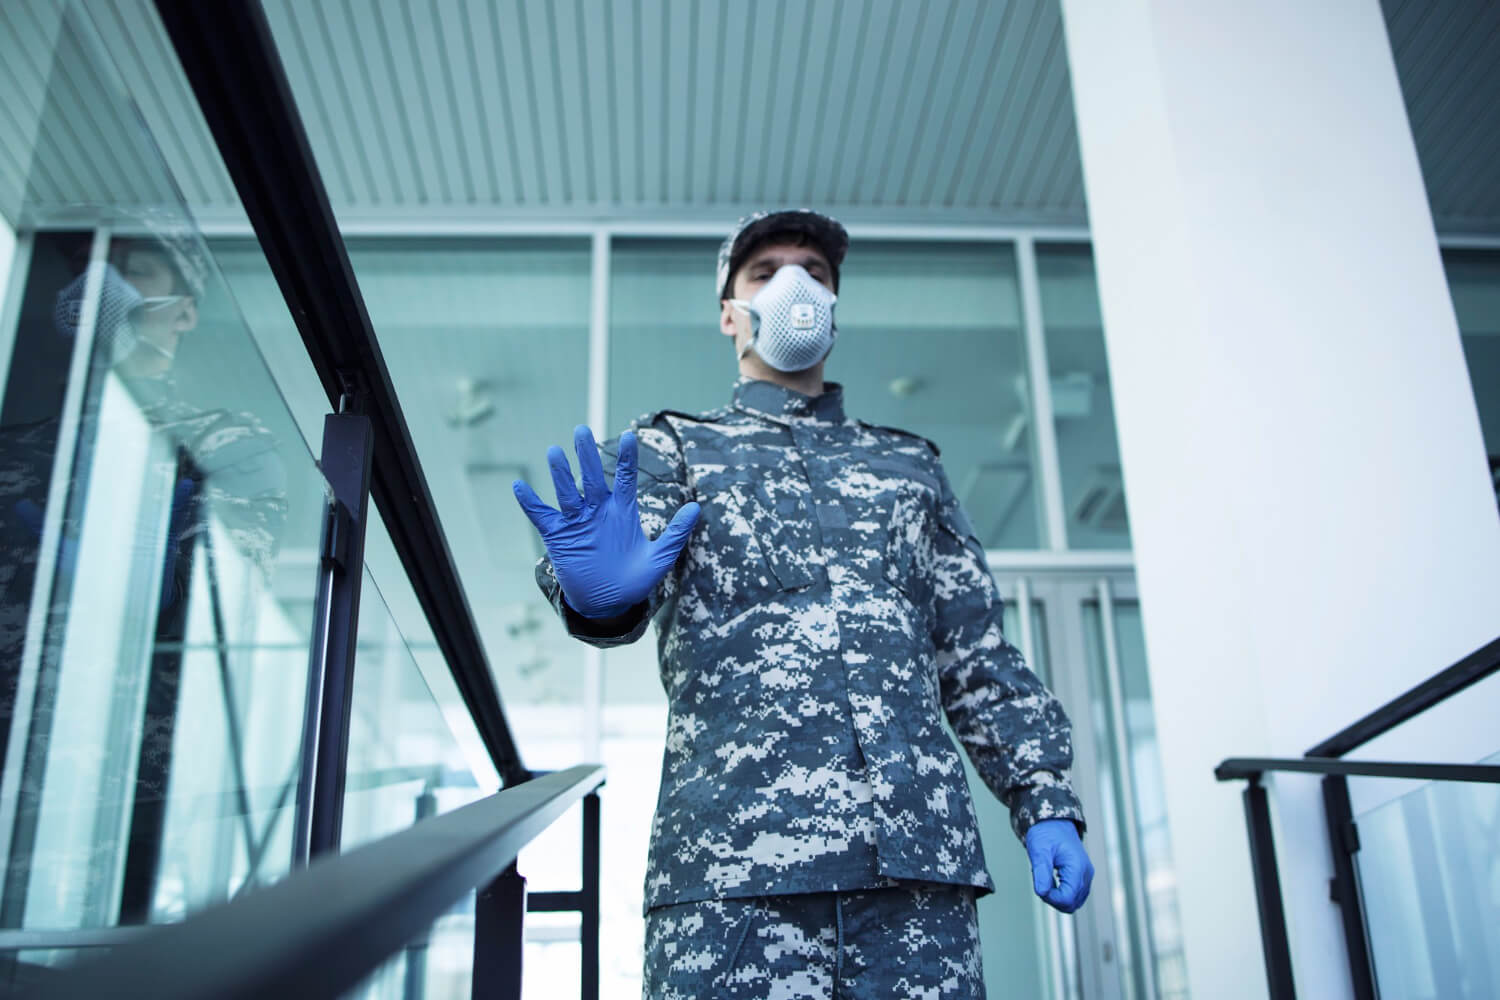 soldier-military-uniform-with-rubber-gloves-face-protection-mask-guarding-hospital-gesturing-stop-sign